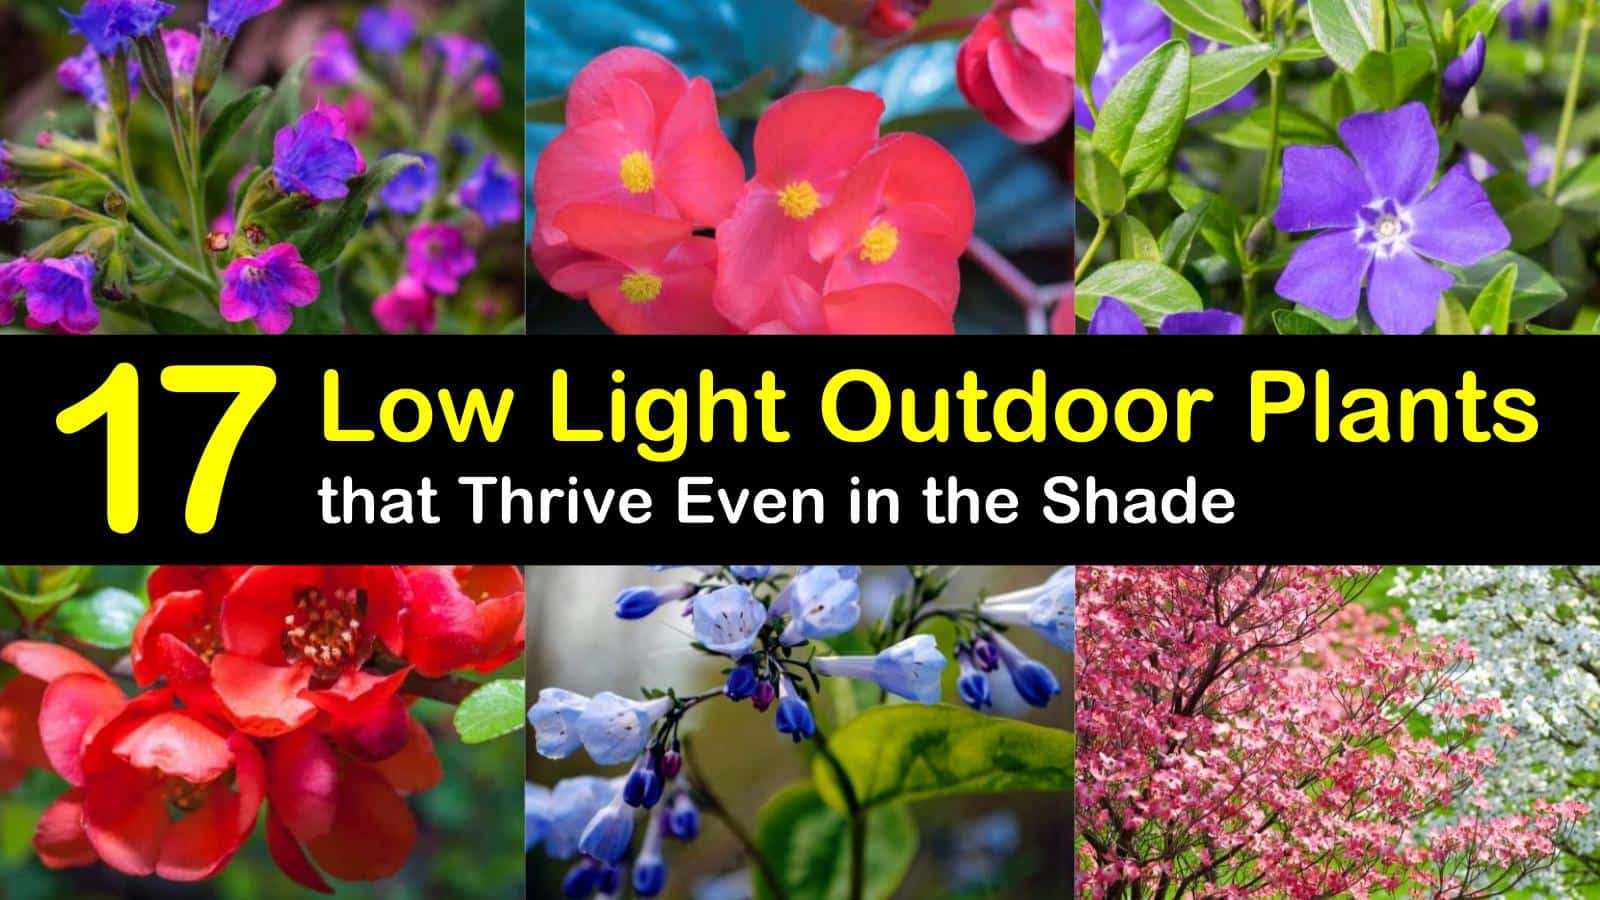 17 Low Light Outdoor Plants Thrive in the Shade